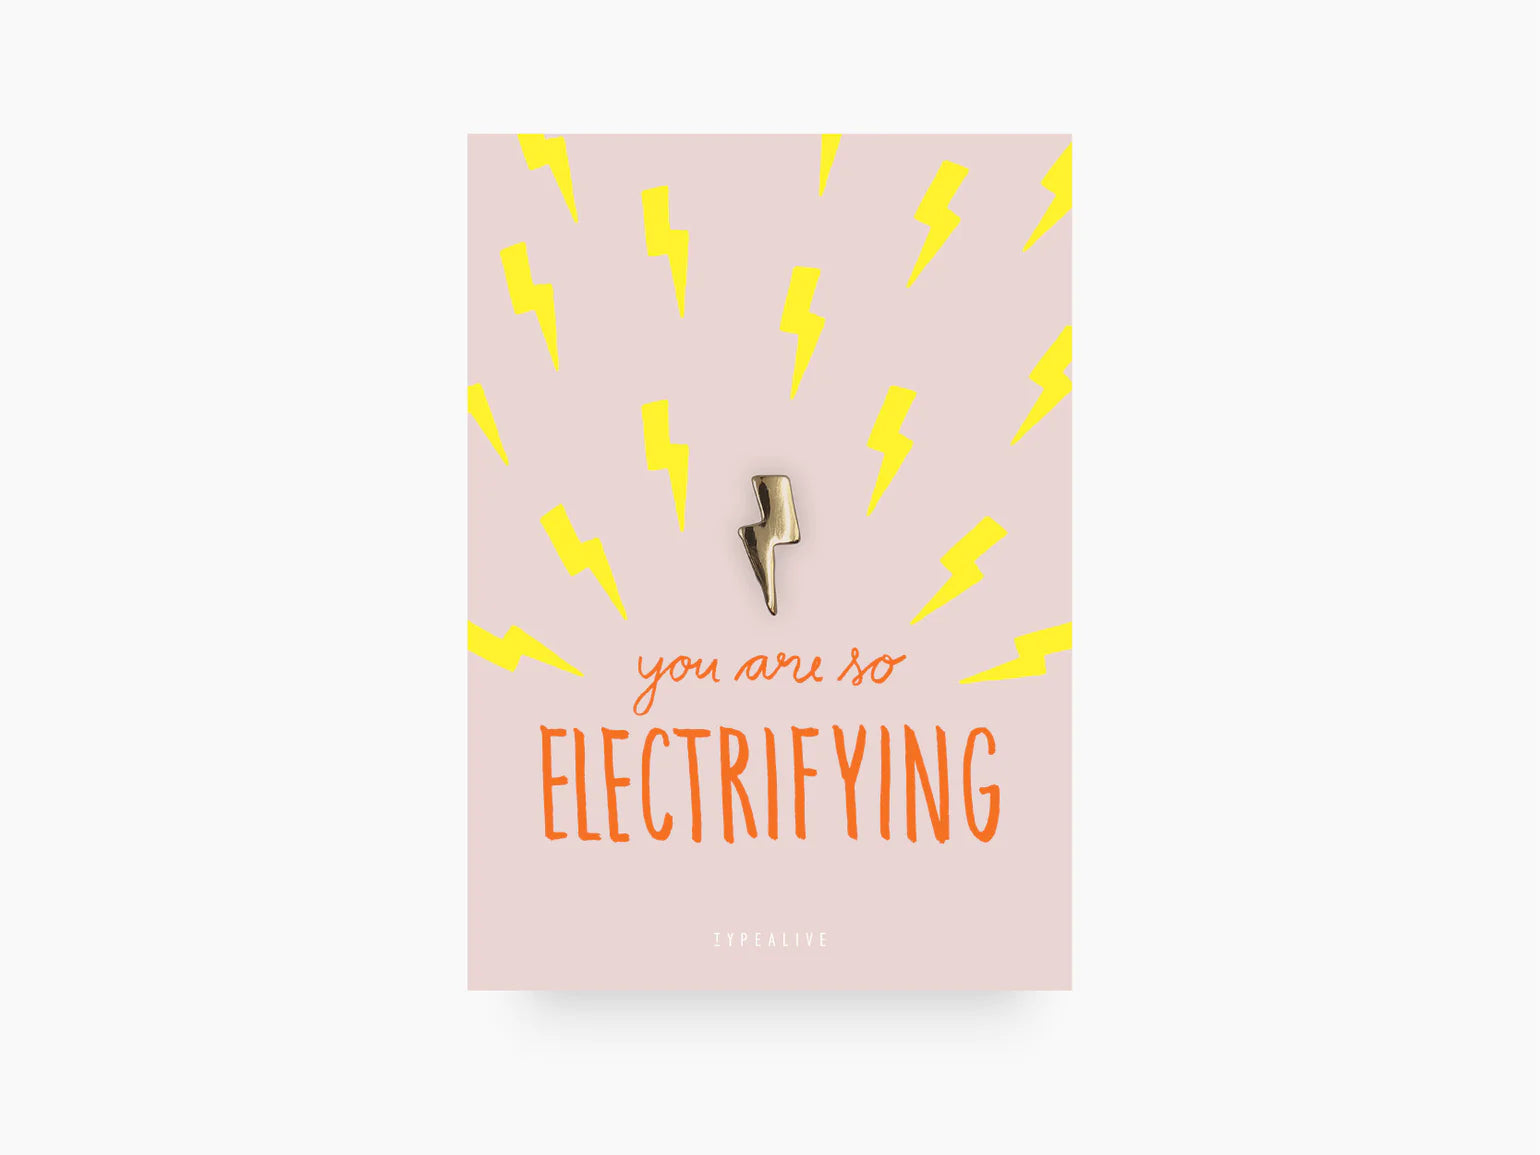 gold plated handmade lightning bolt pin by Typealive, on printed A7 card